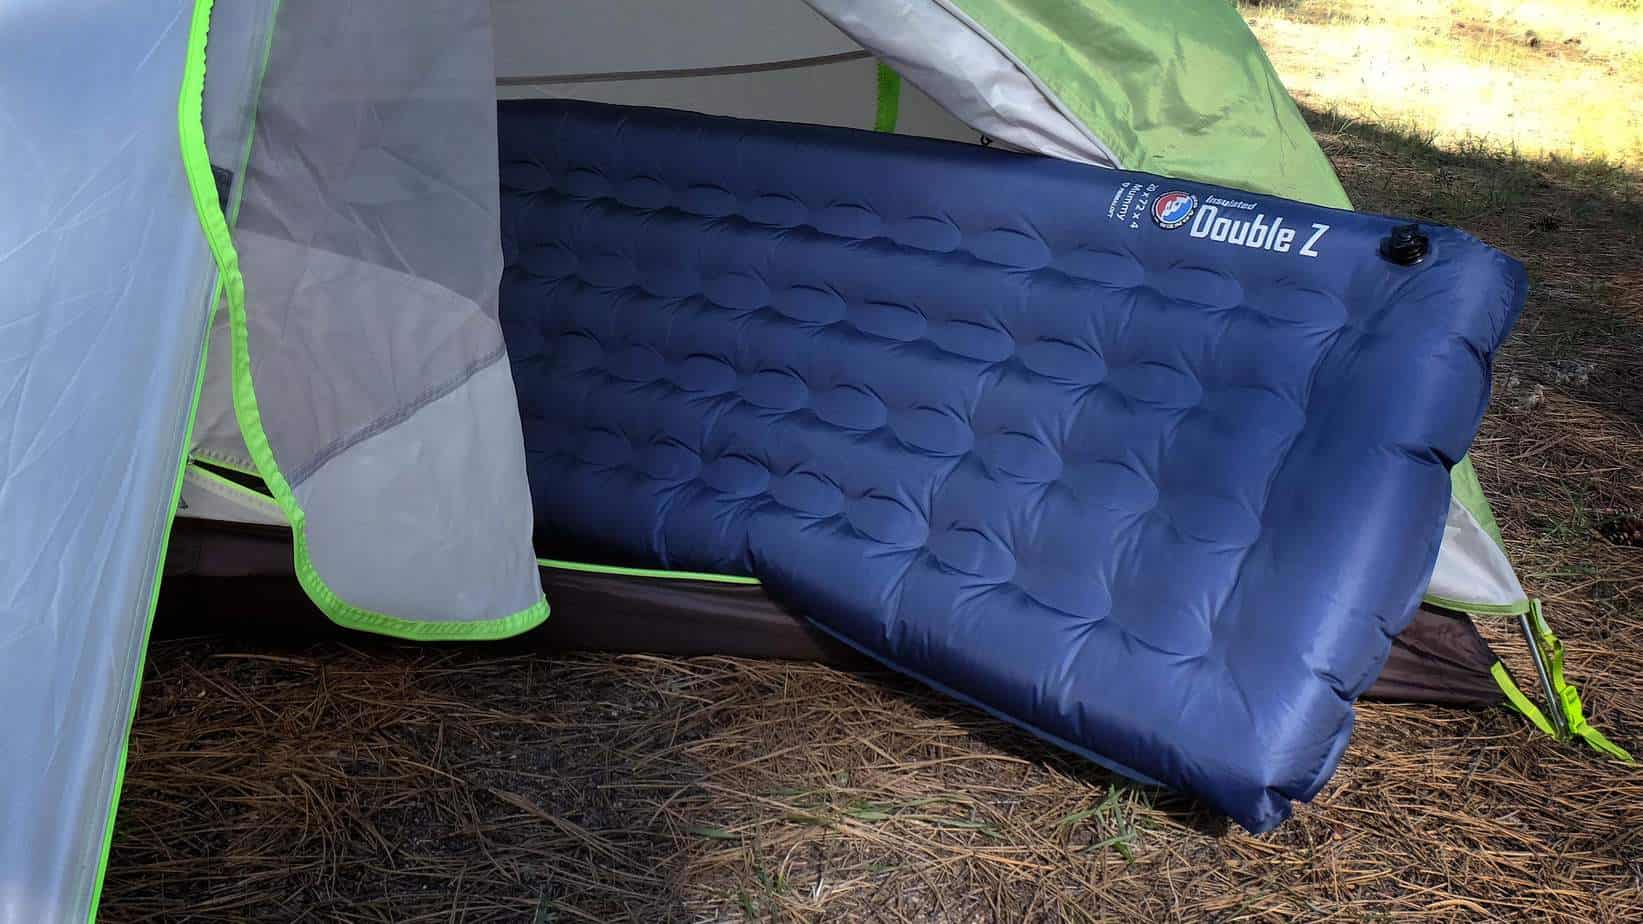 big agnes double z insulated air mattress